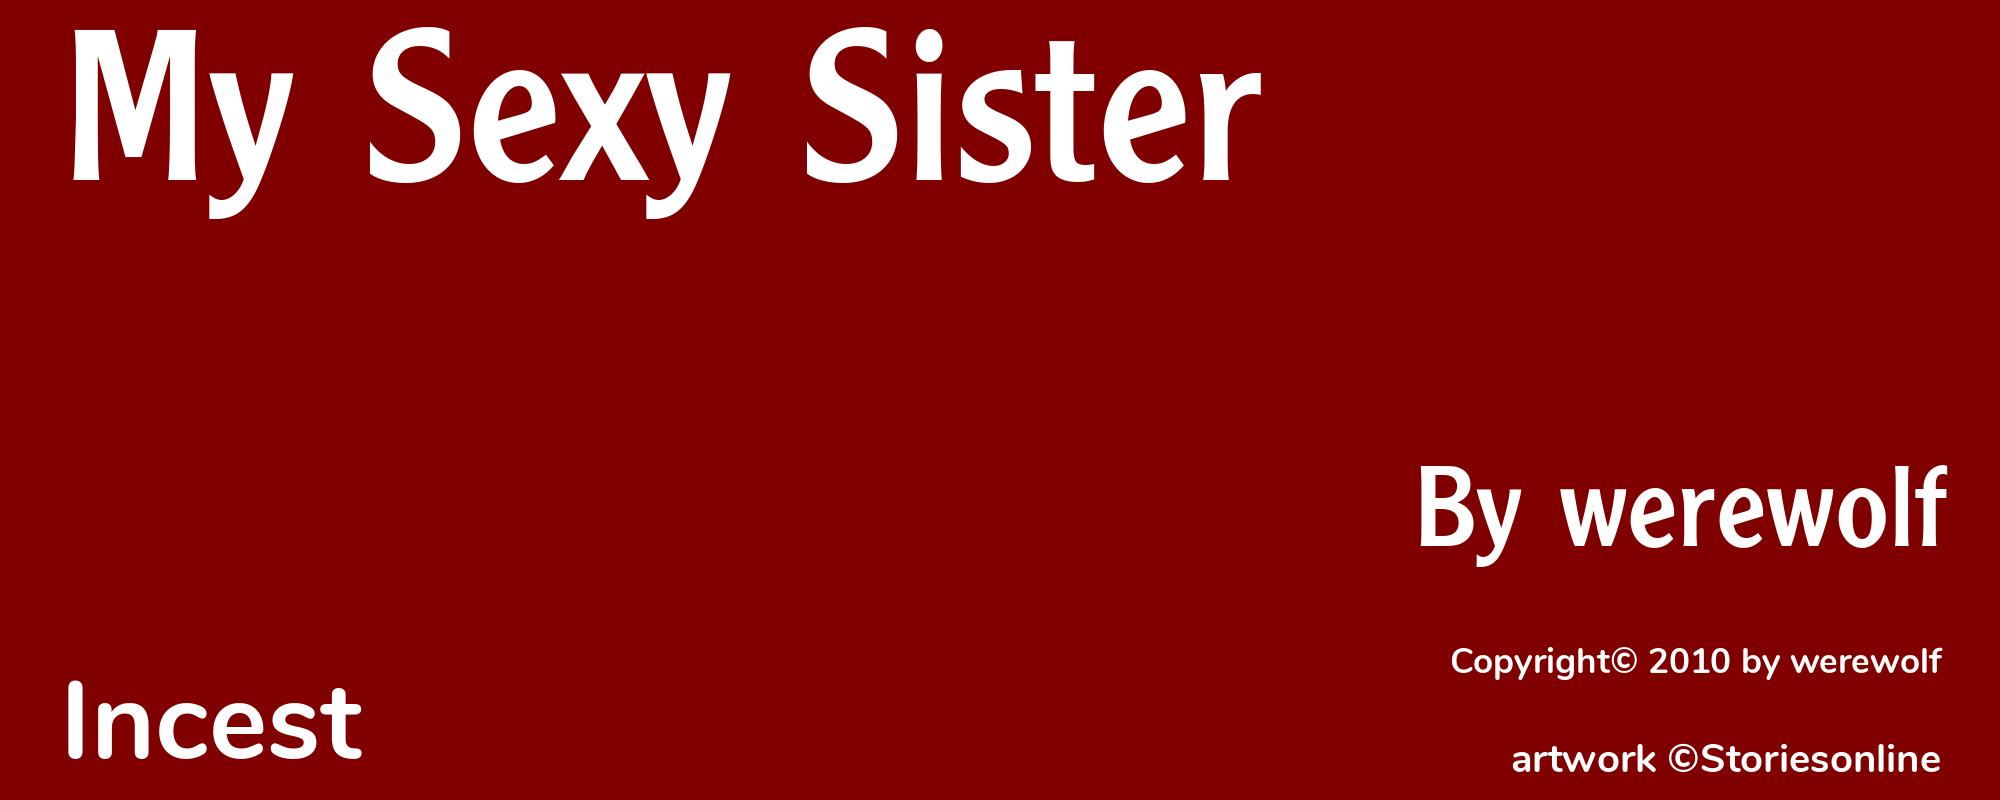 My Sexy Sister - Cover